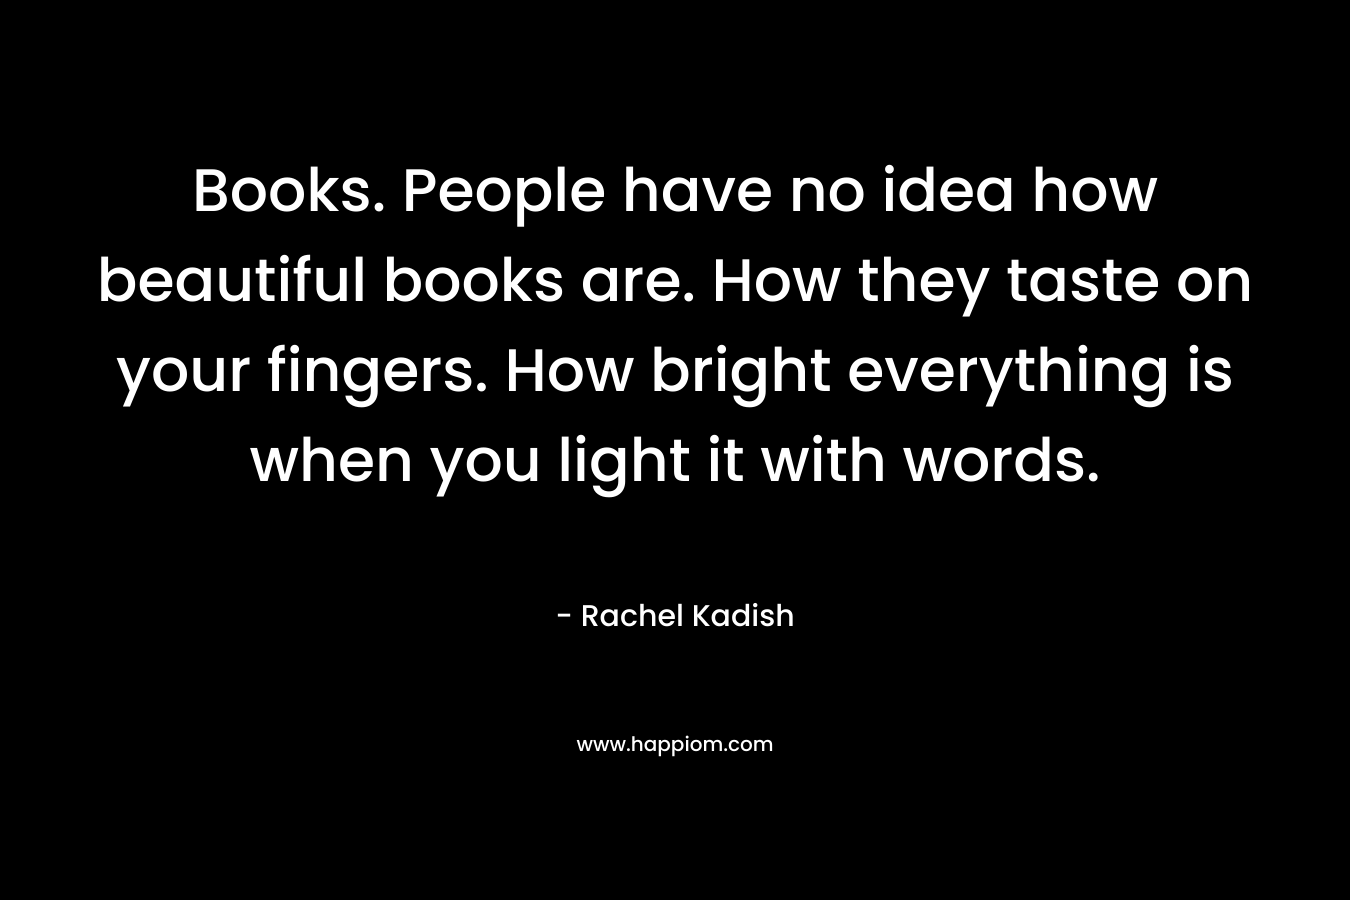 Books. People have no idea how beautiful books are. How they taste on your fingers. How bright everything is when you light it with words. – Rachel Kadish